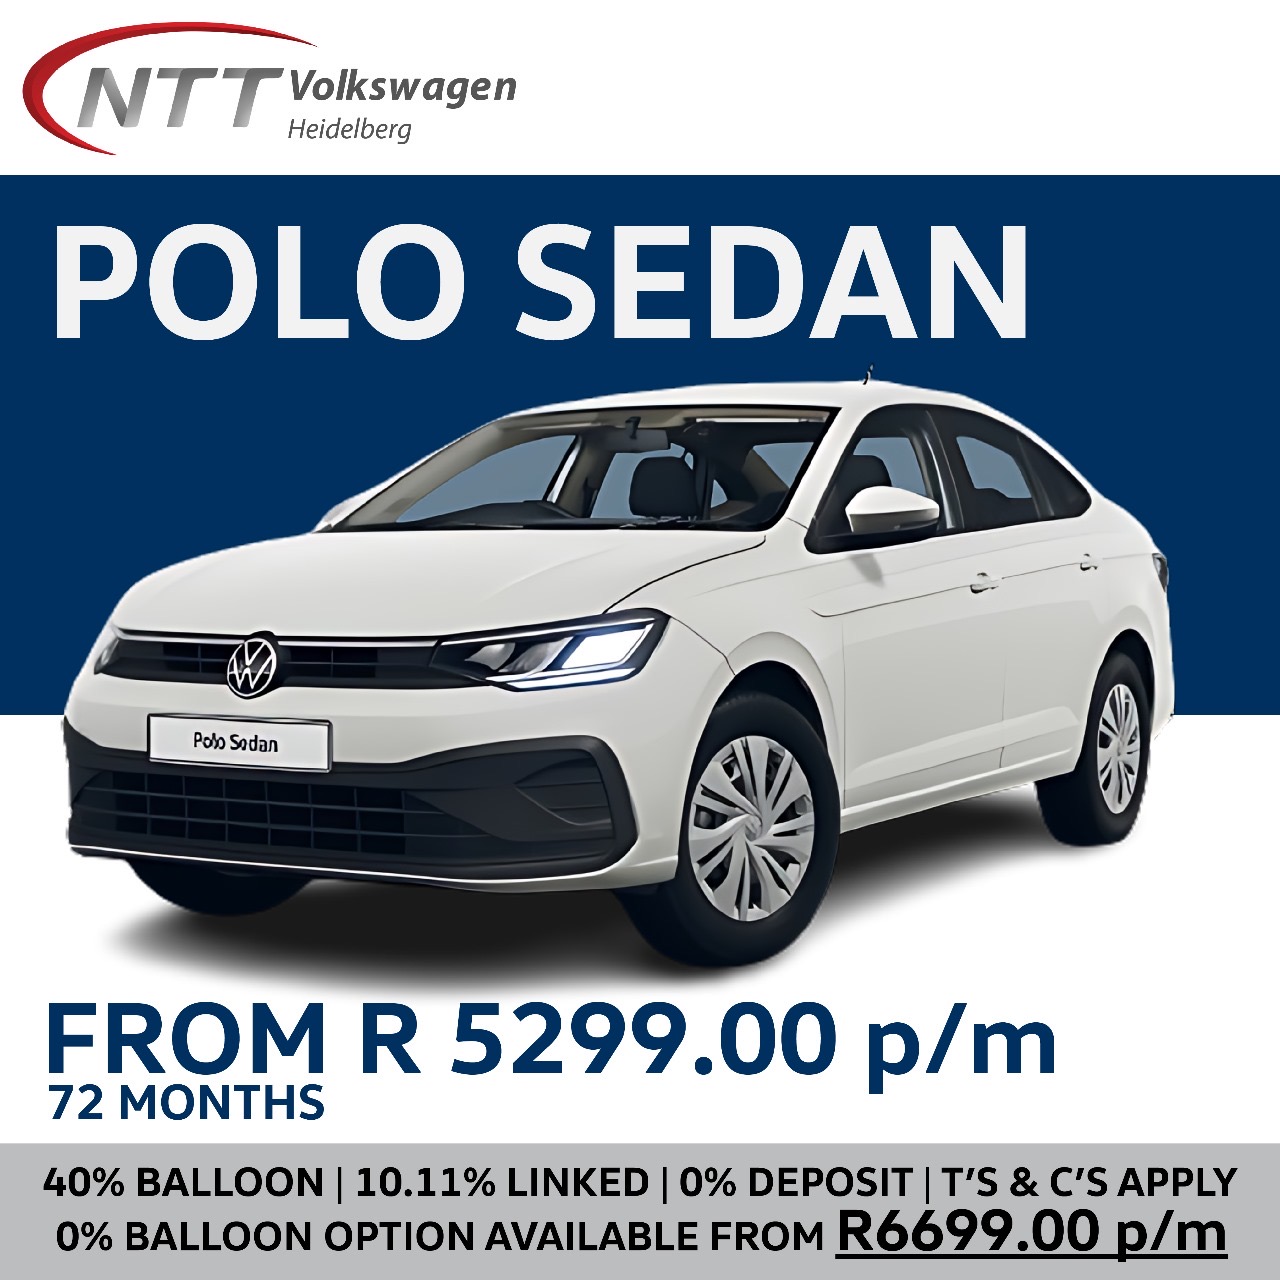 POLO SEDAN - NTT Volkswagen - New, Used & Demo Cars for Sale in South Africa